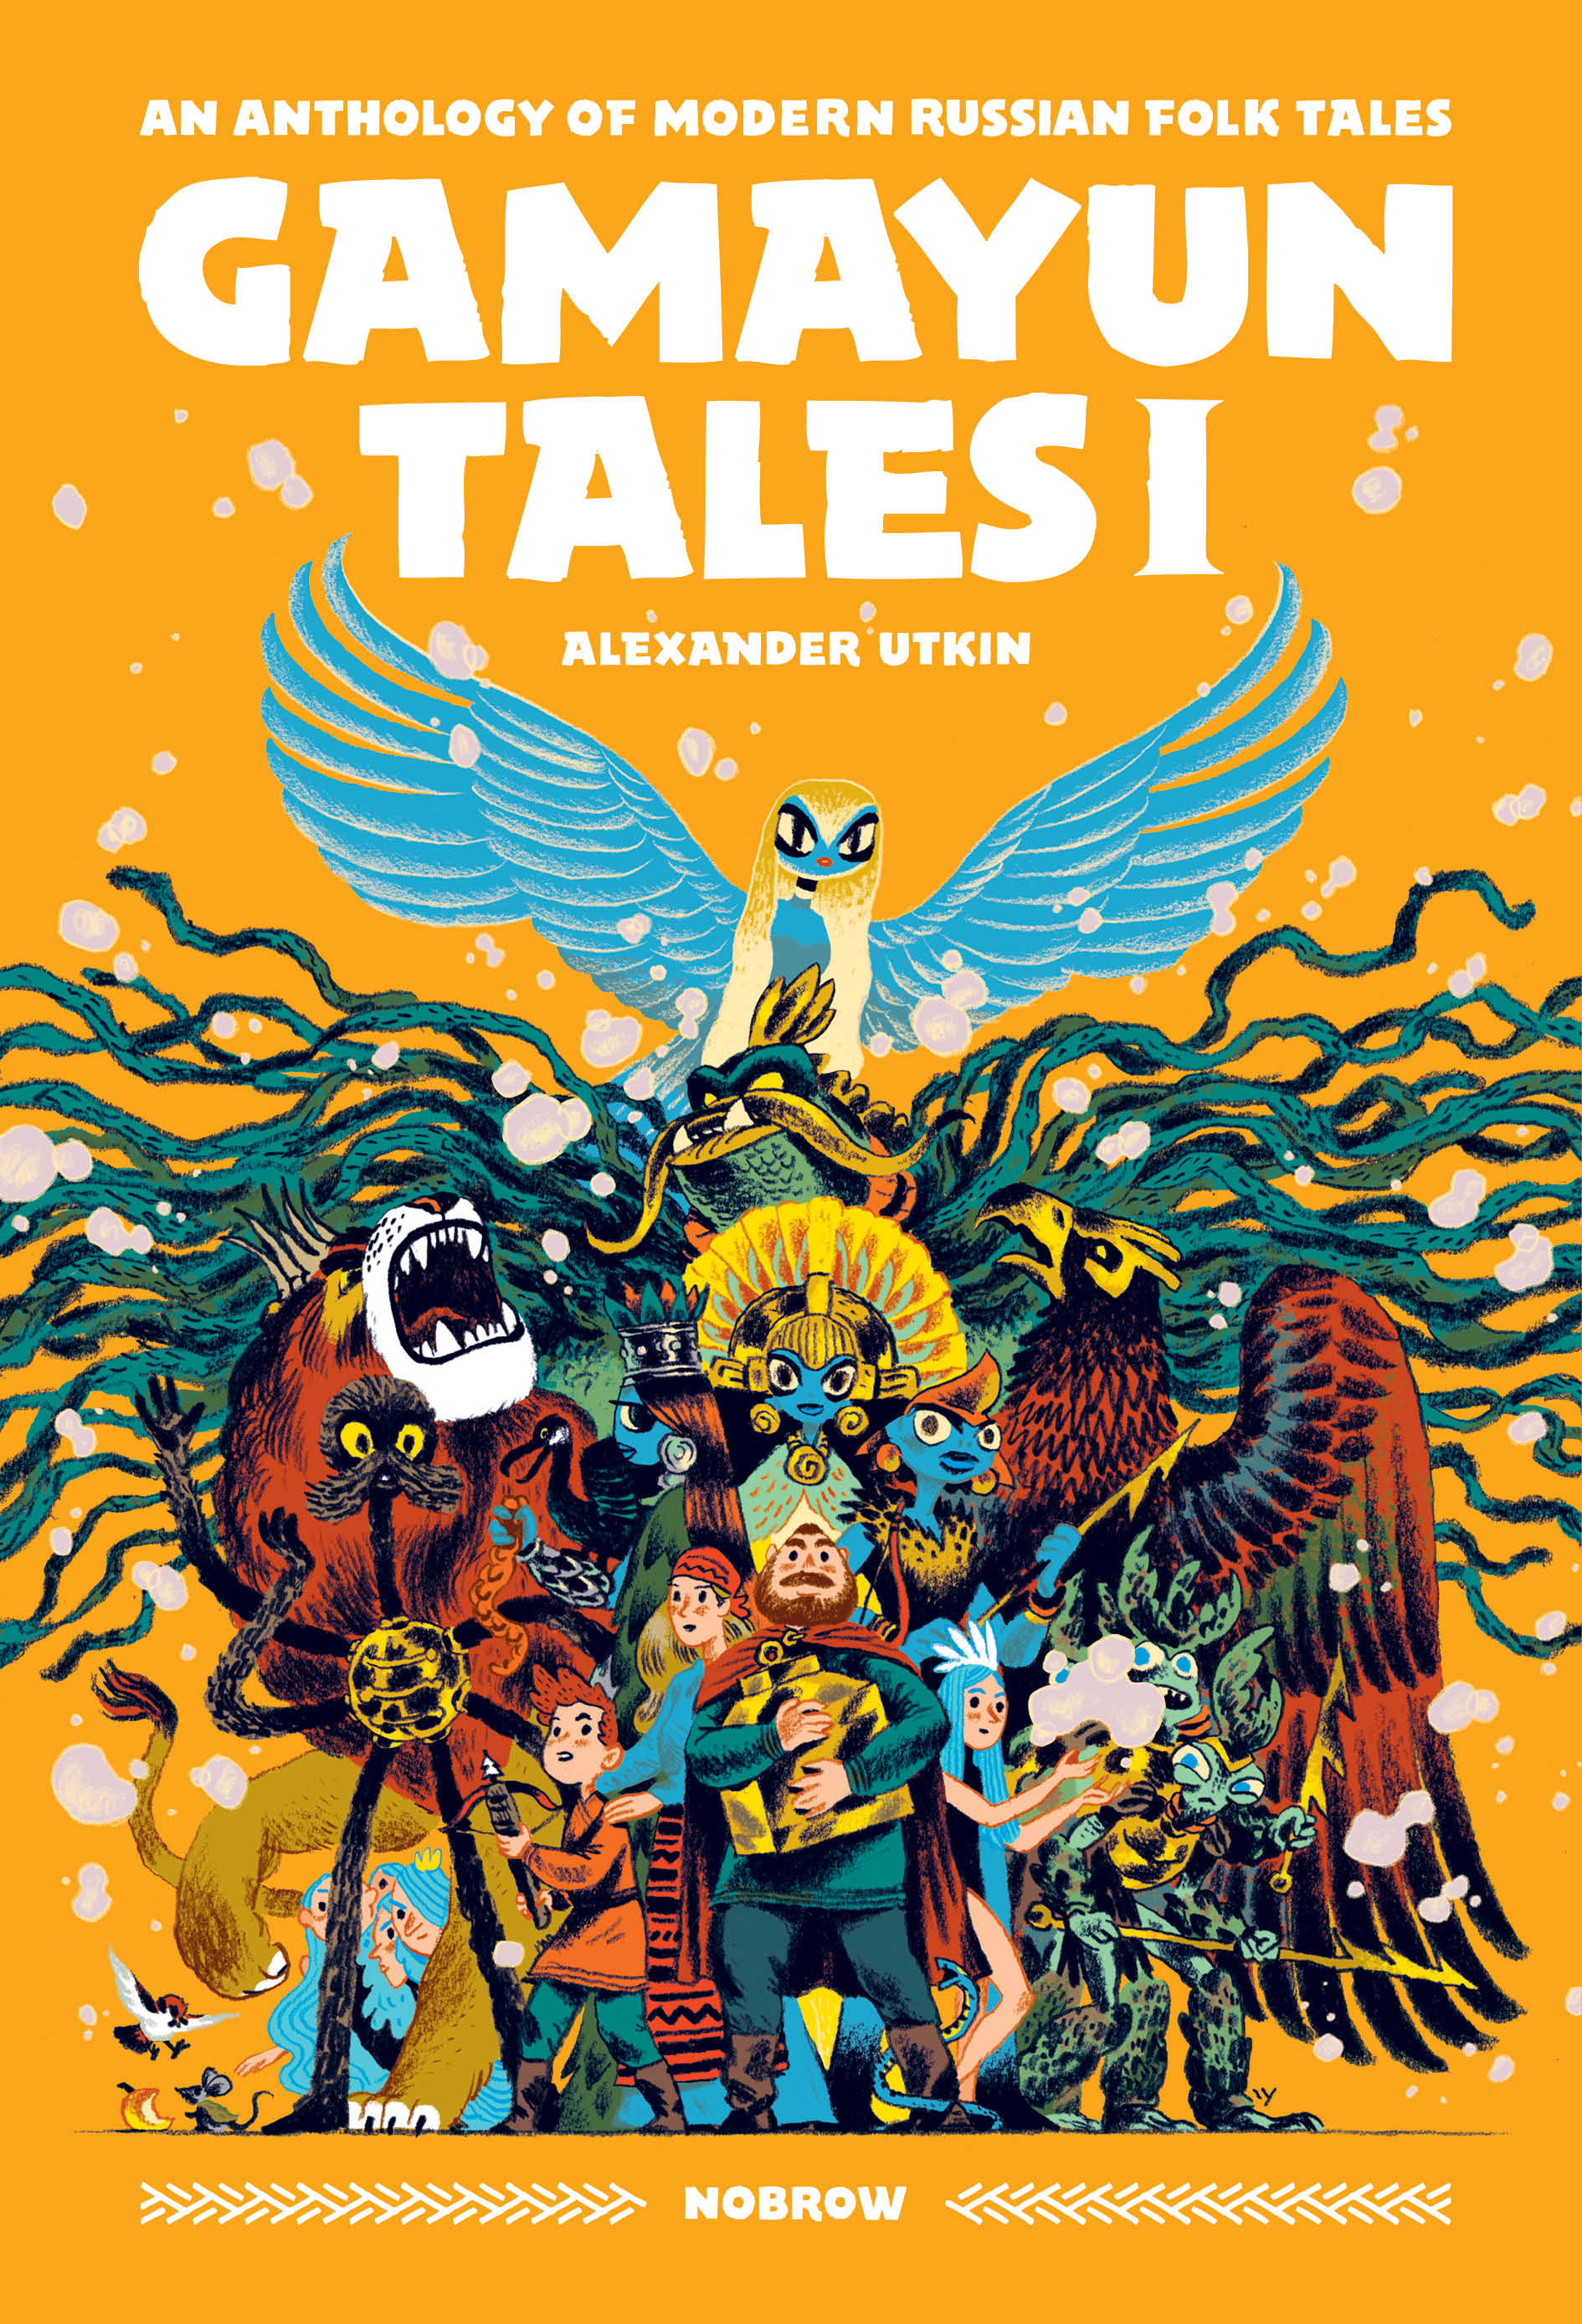 Gamayun Tales I book cover